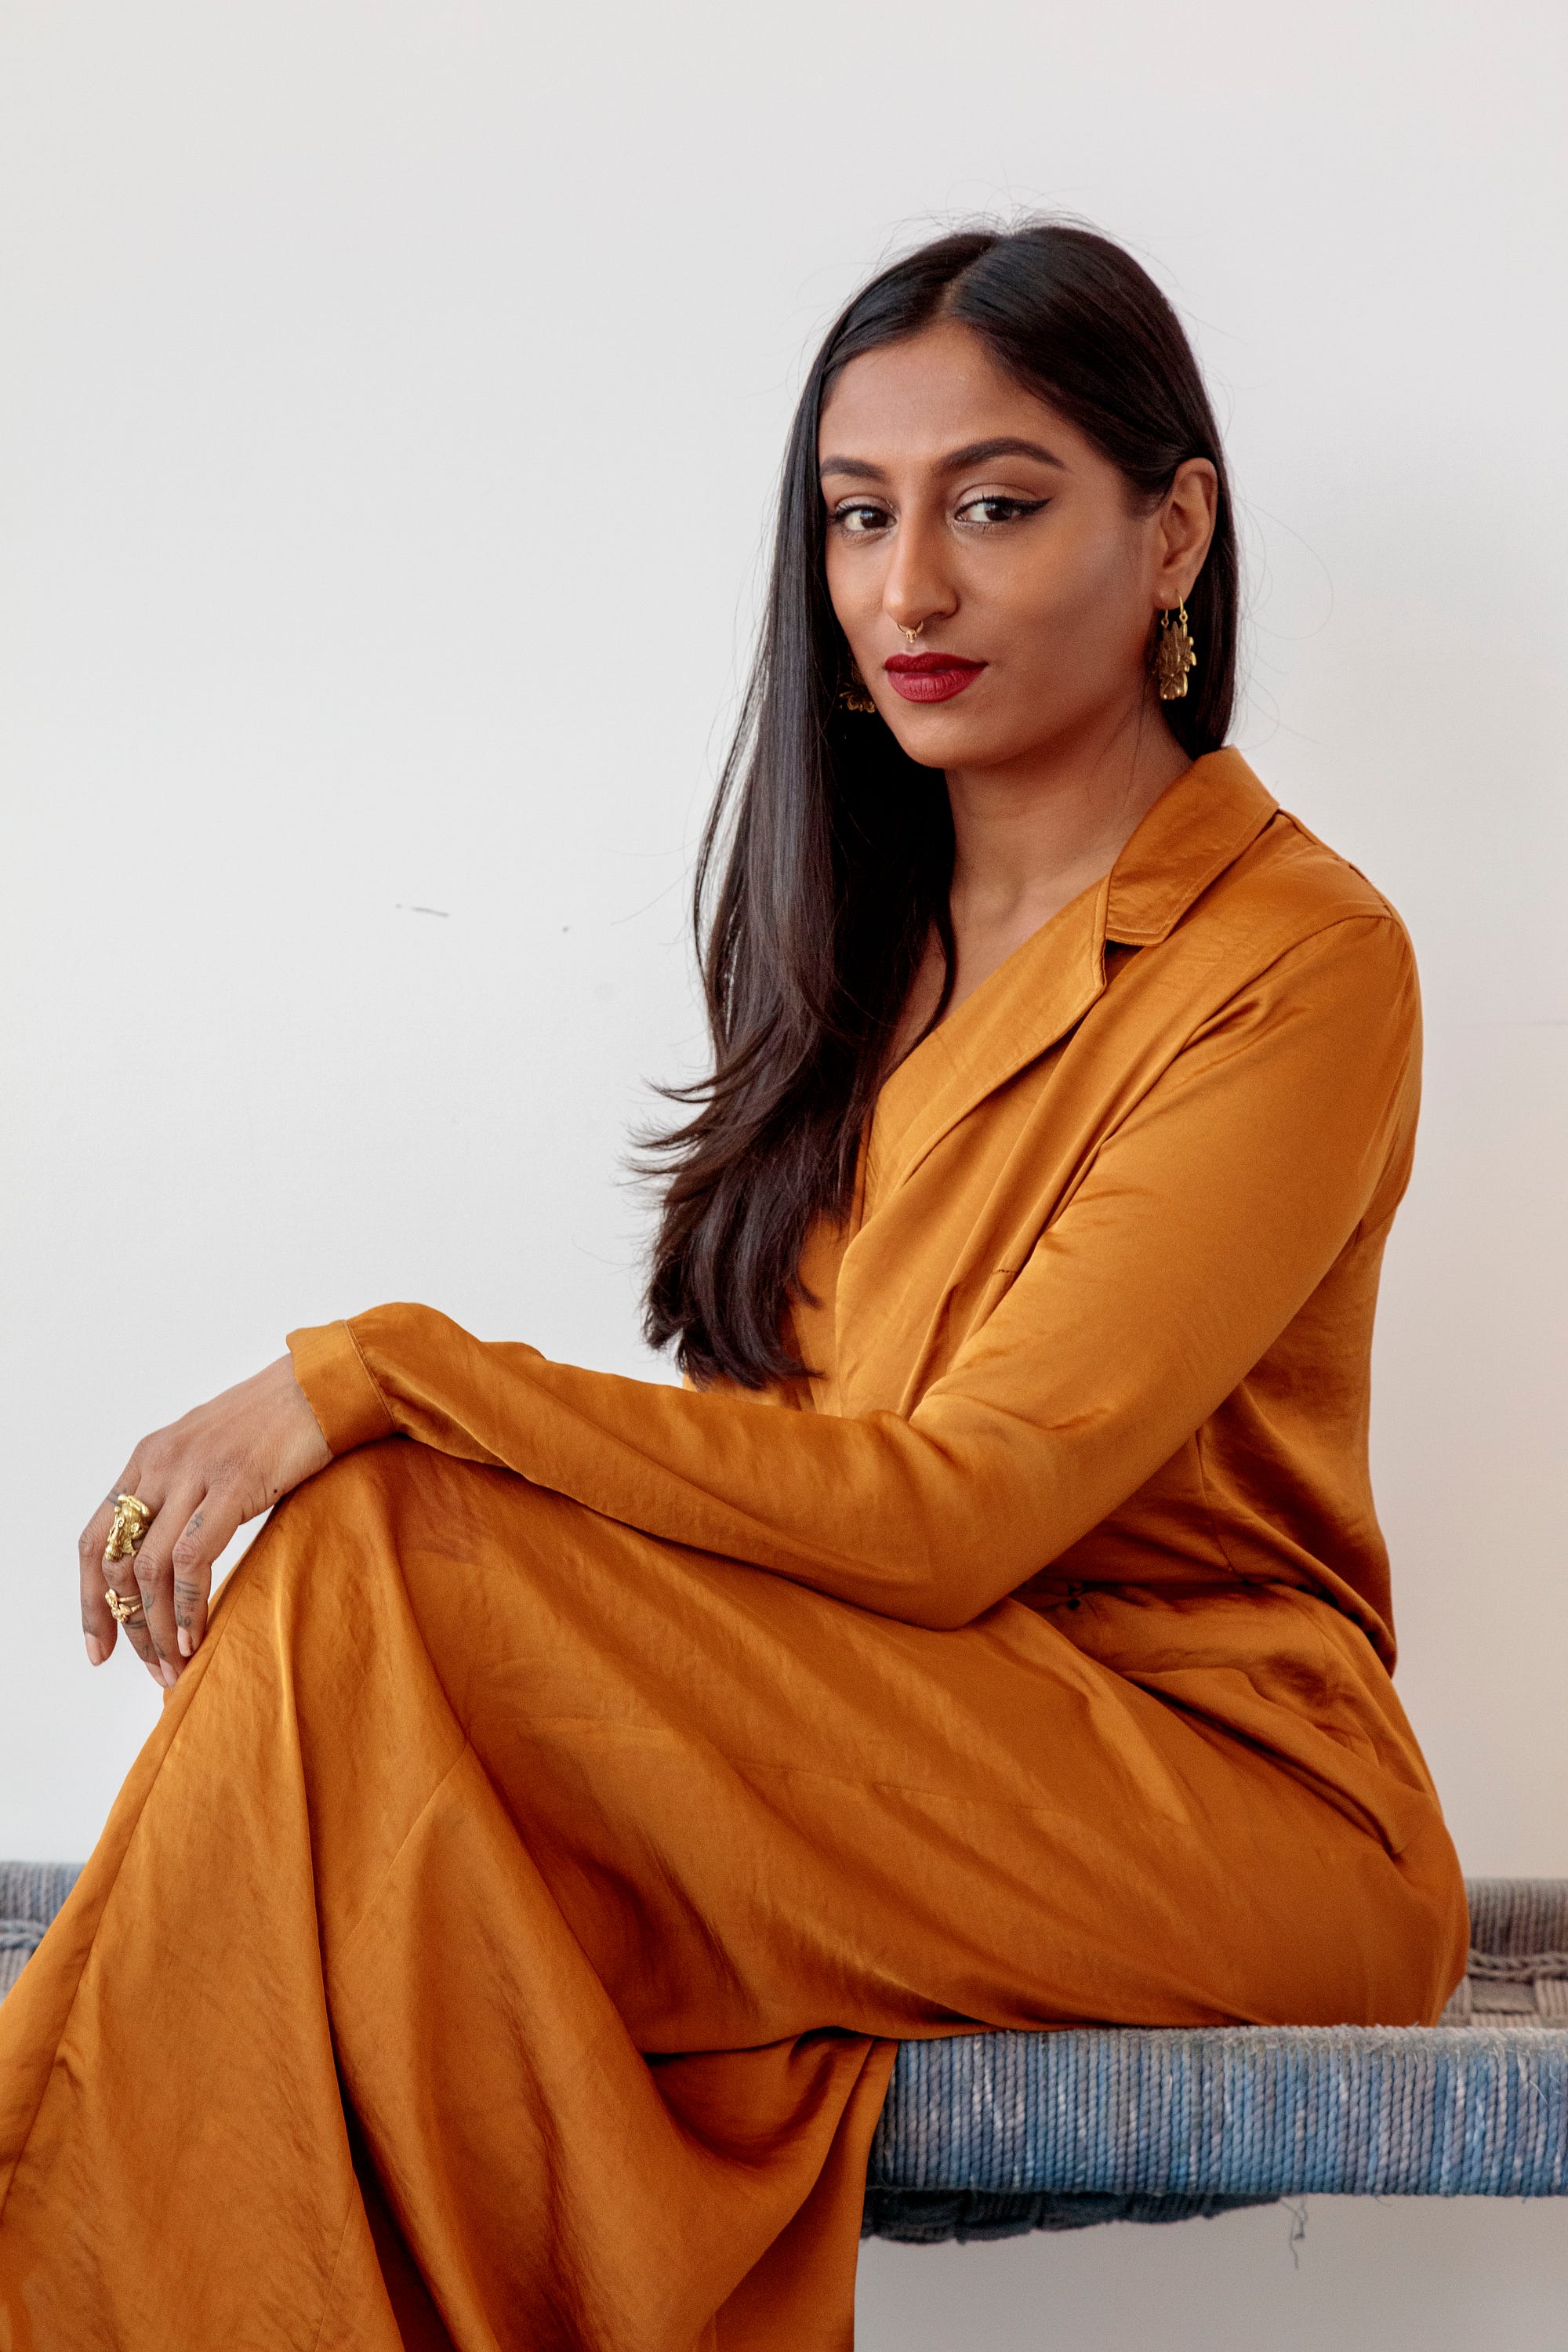 Pavana Reddy, the fierce poet who won our hearts over is wearing the marigold shirt dress by Bastet Noir, photo by: Joshua White